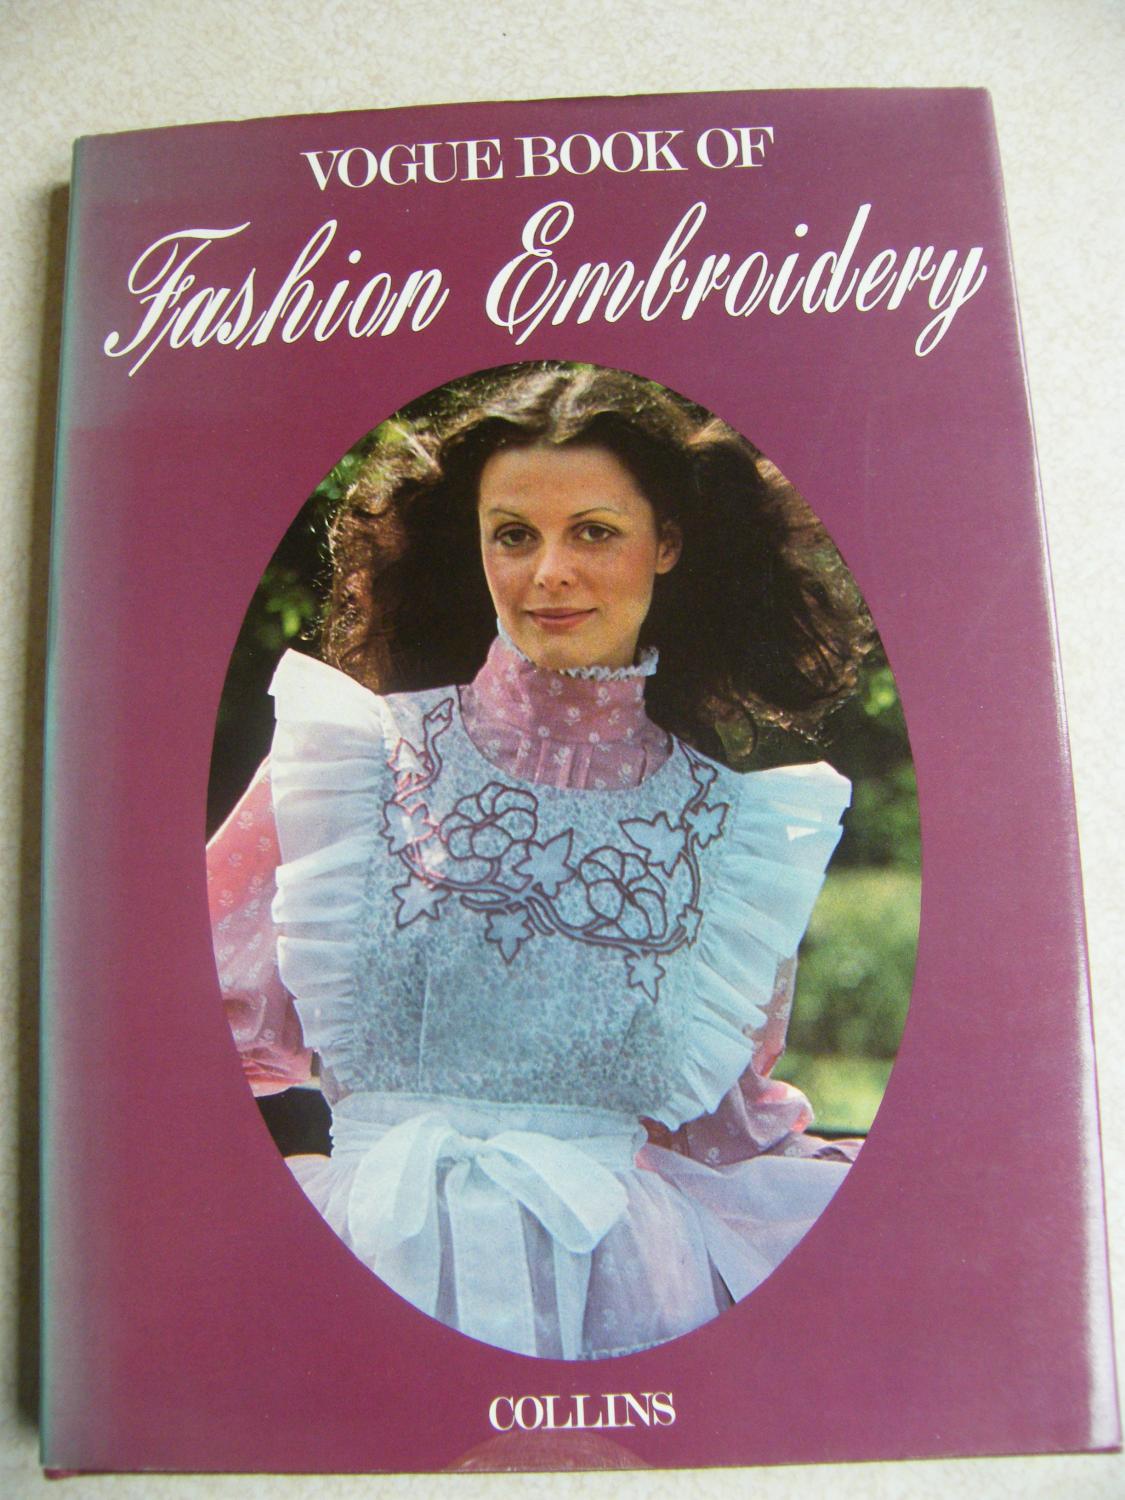 Vogue book of fashion embroidery : Brittain, Judy : Free Download, Borrow,  and Streaming : Internet Archive